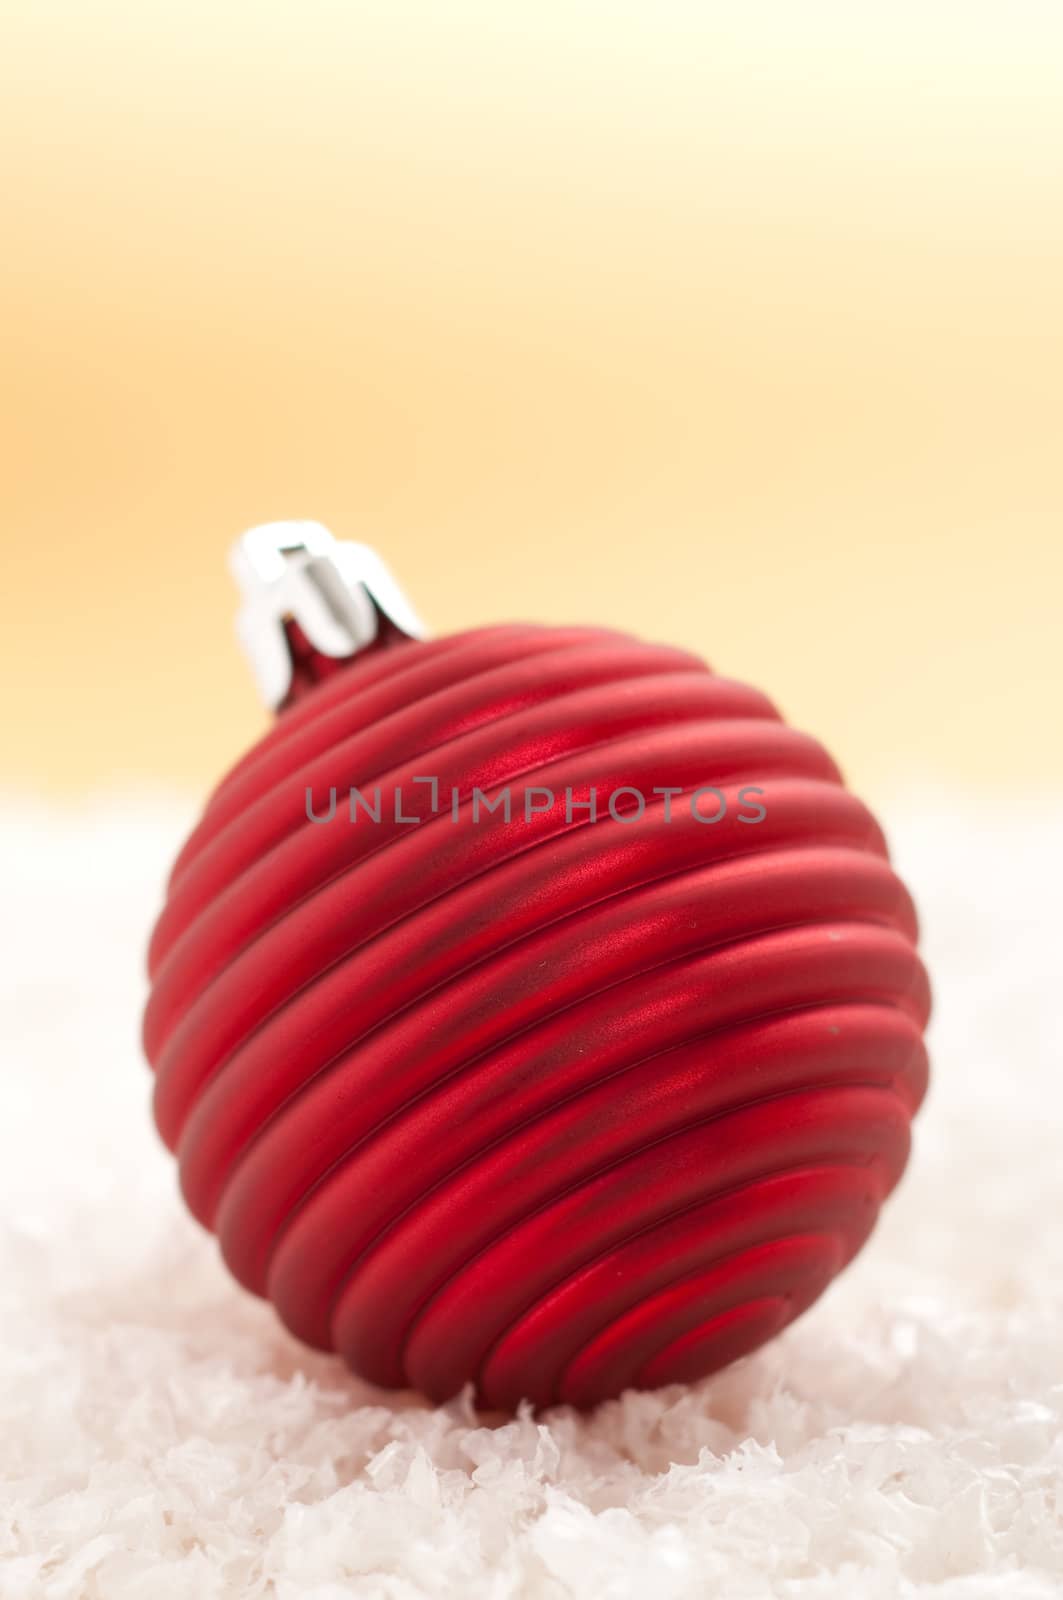 Red christmas ornament by Rainman